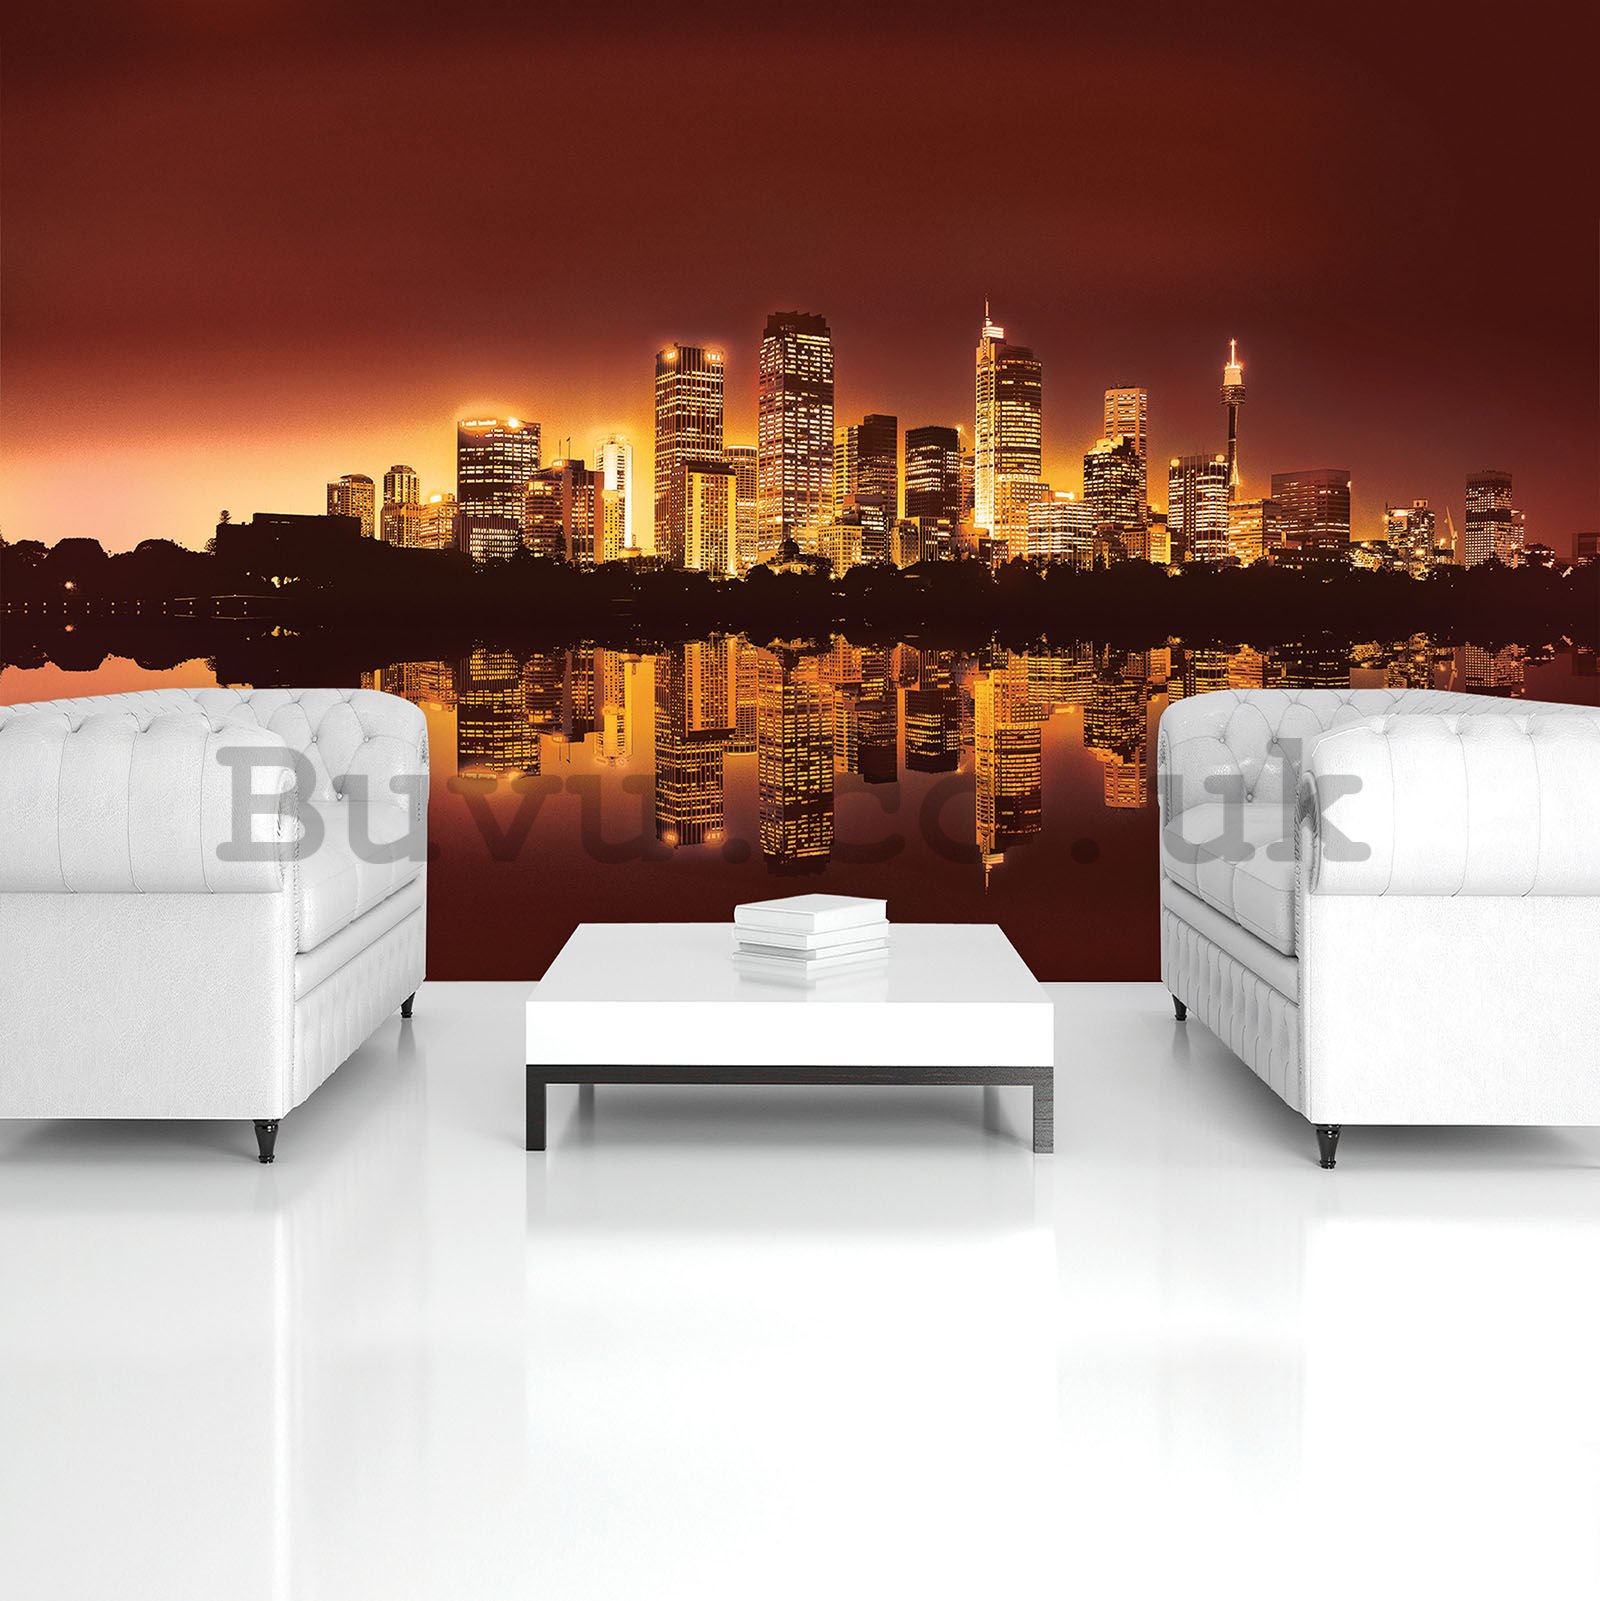 Wall mural vlies: View on the city (sunset) - 152,5x104 cm